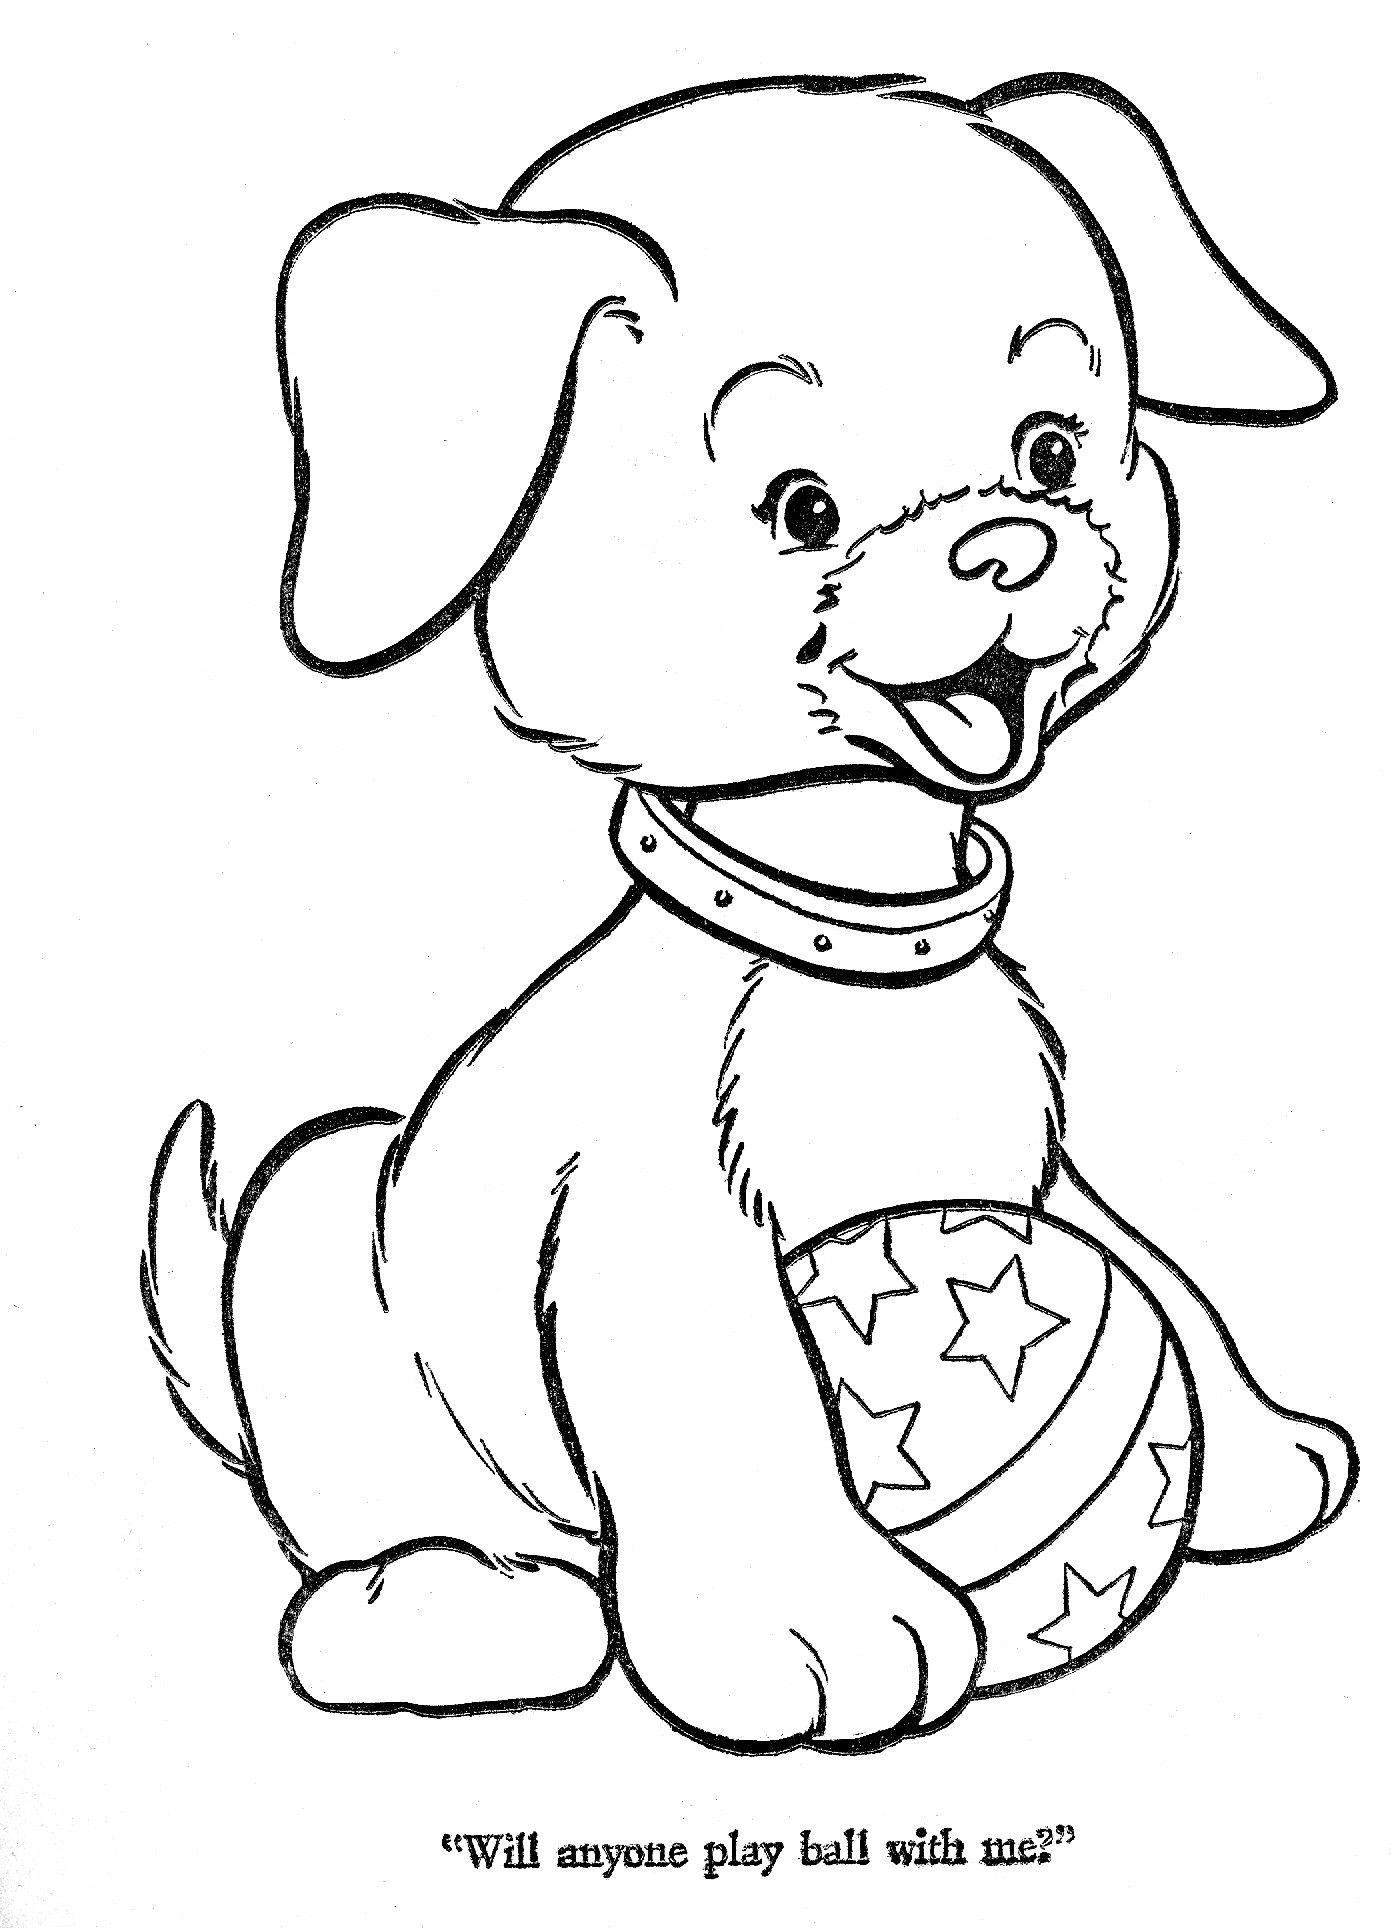 Great dog coloring book for kids 5-6 years old